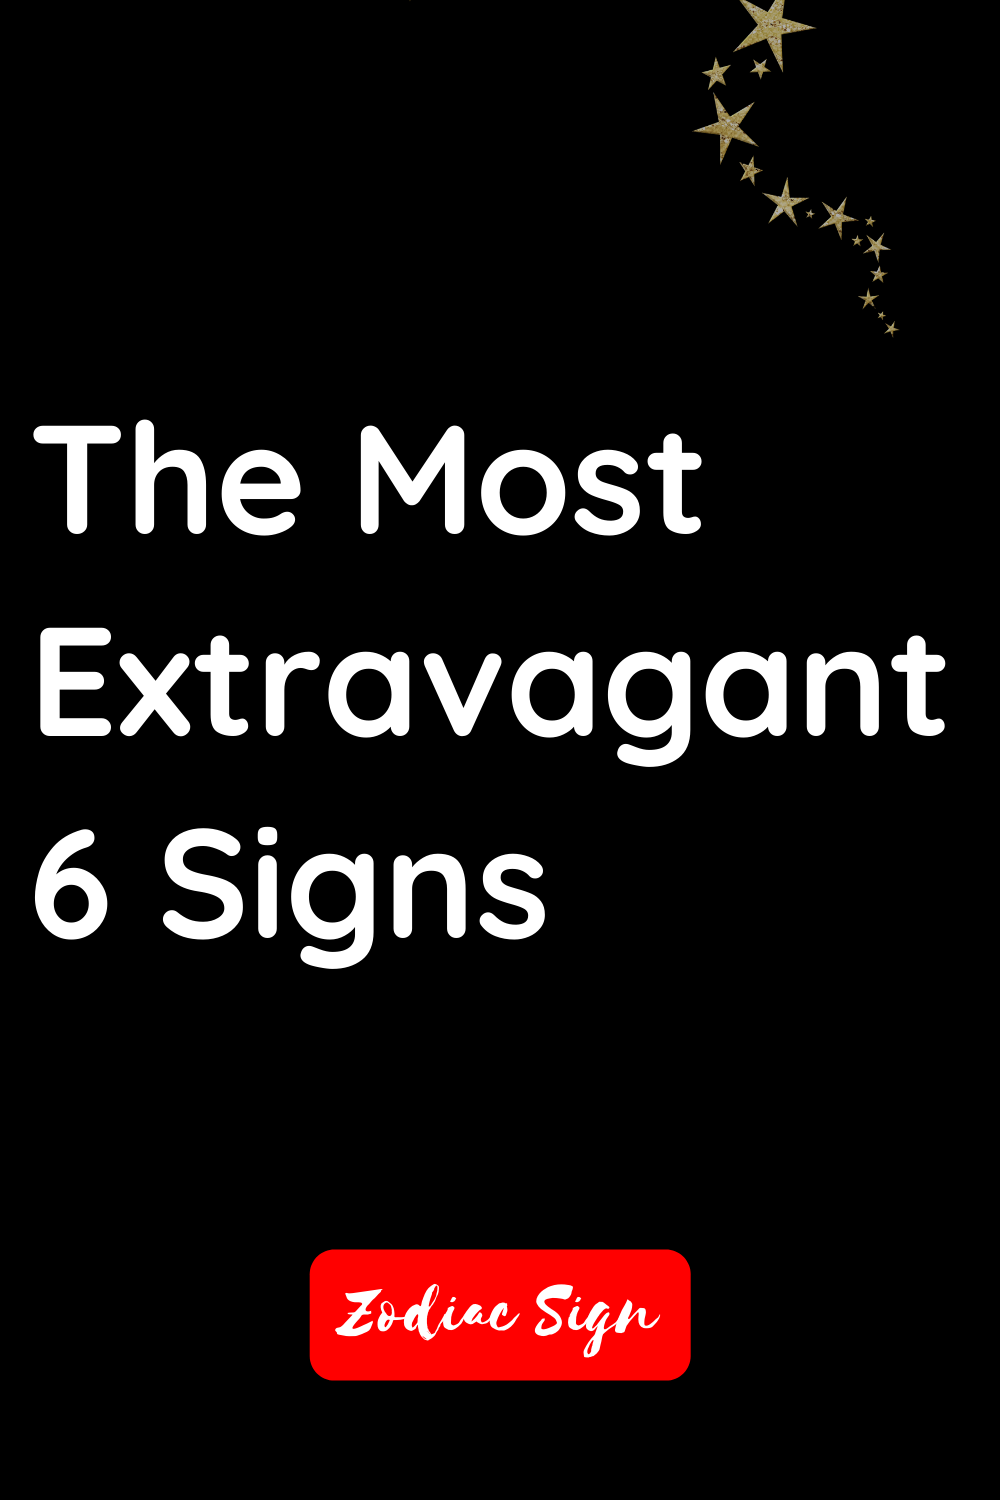 The most extravagant 6 signs